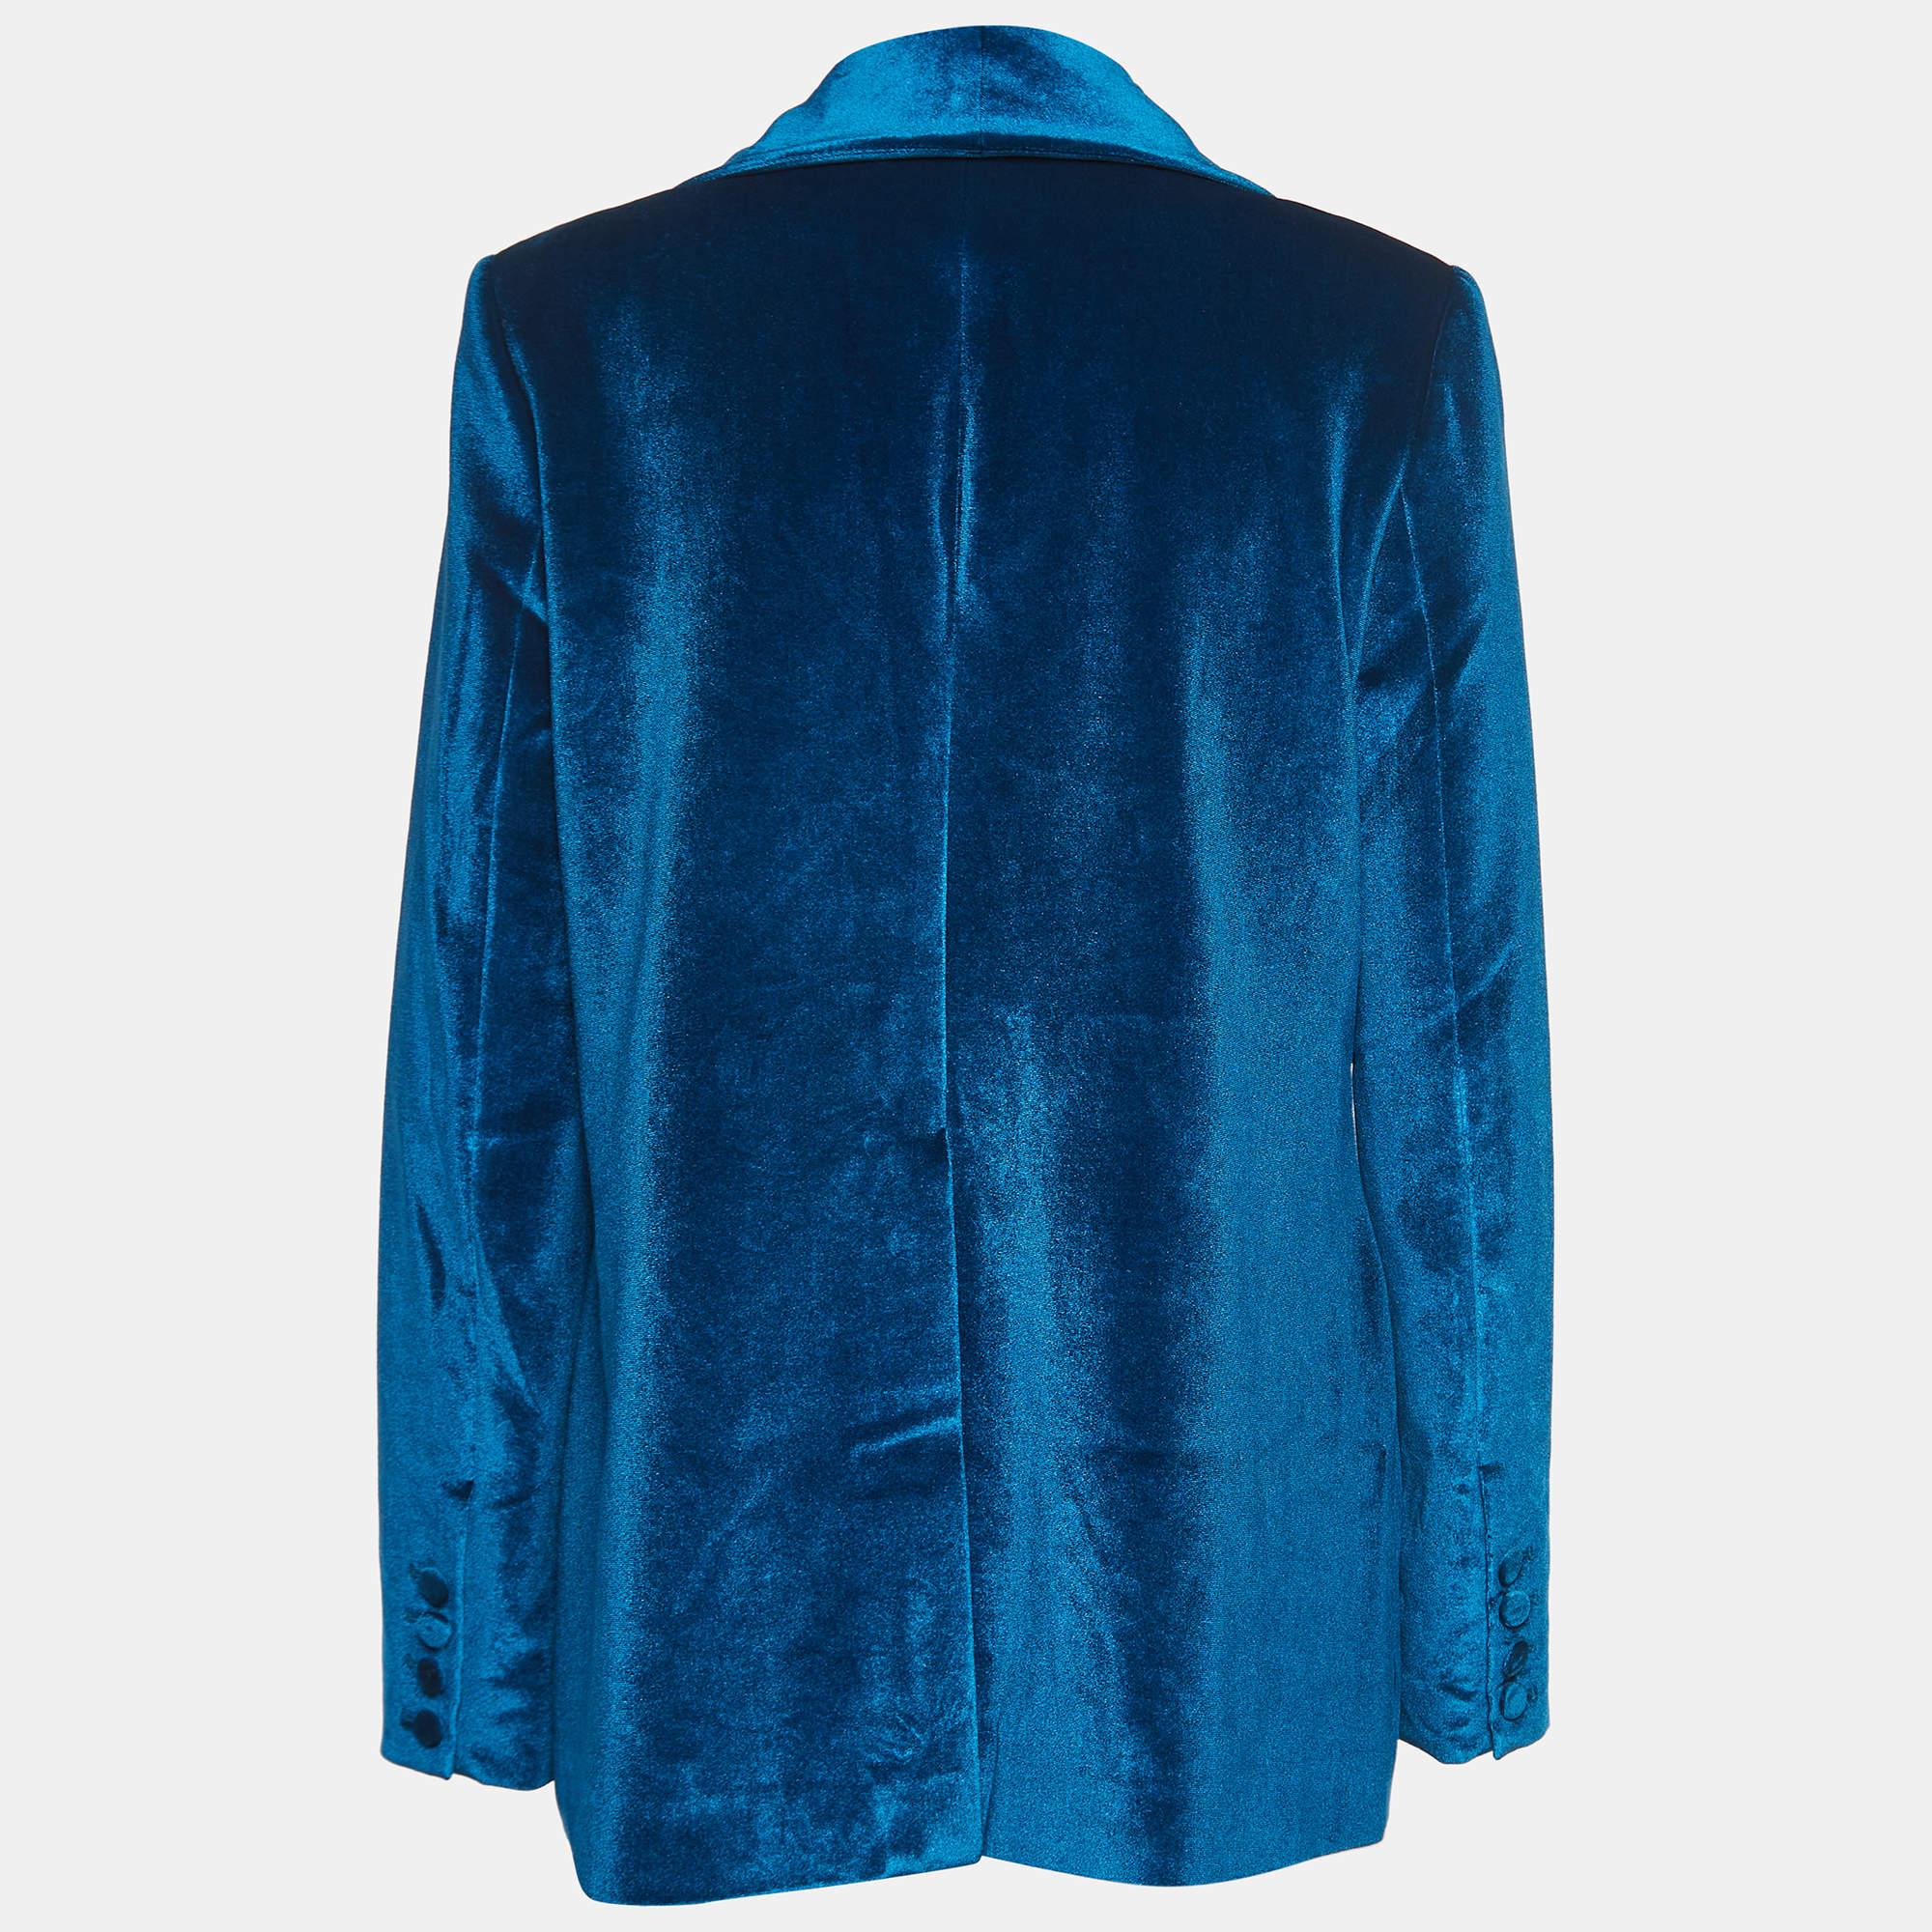  In this self-portrait, the subject dons a luxurious blue velvet blazer that exudes sophistication and confidence. The deep, lustrous hue complements the wearer's demeanor, creating a striking visual impact. The blazer's tailored fit accentuates the